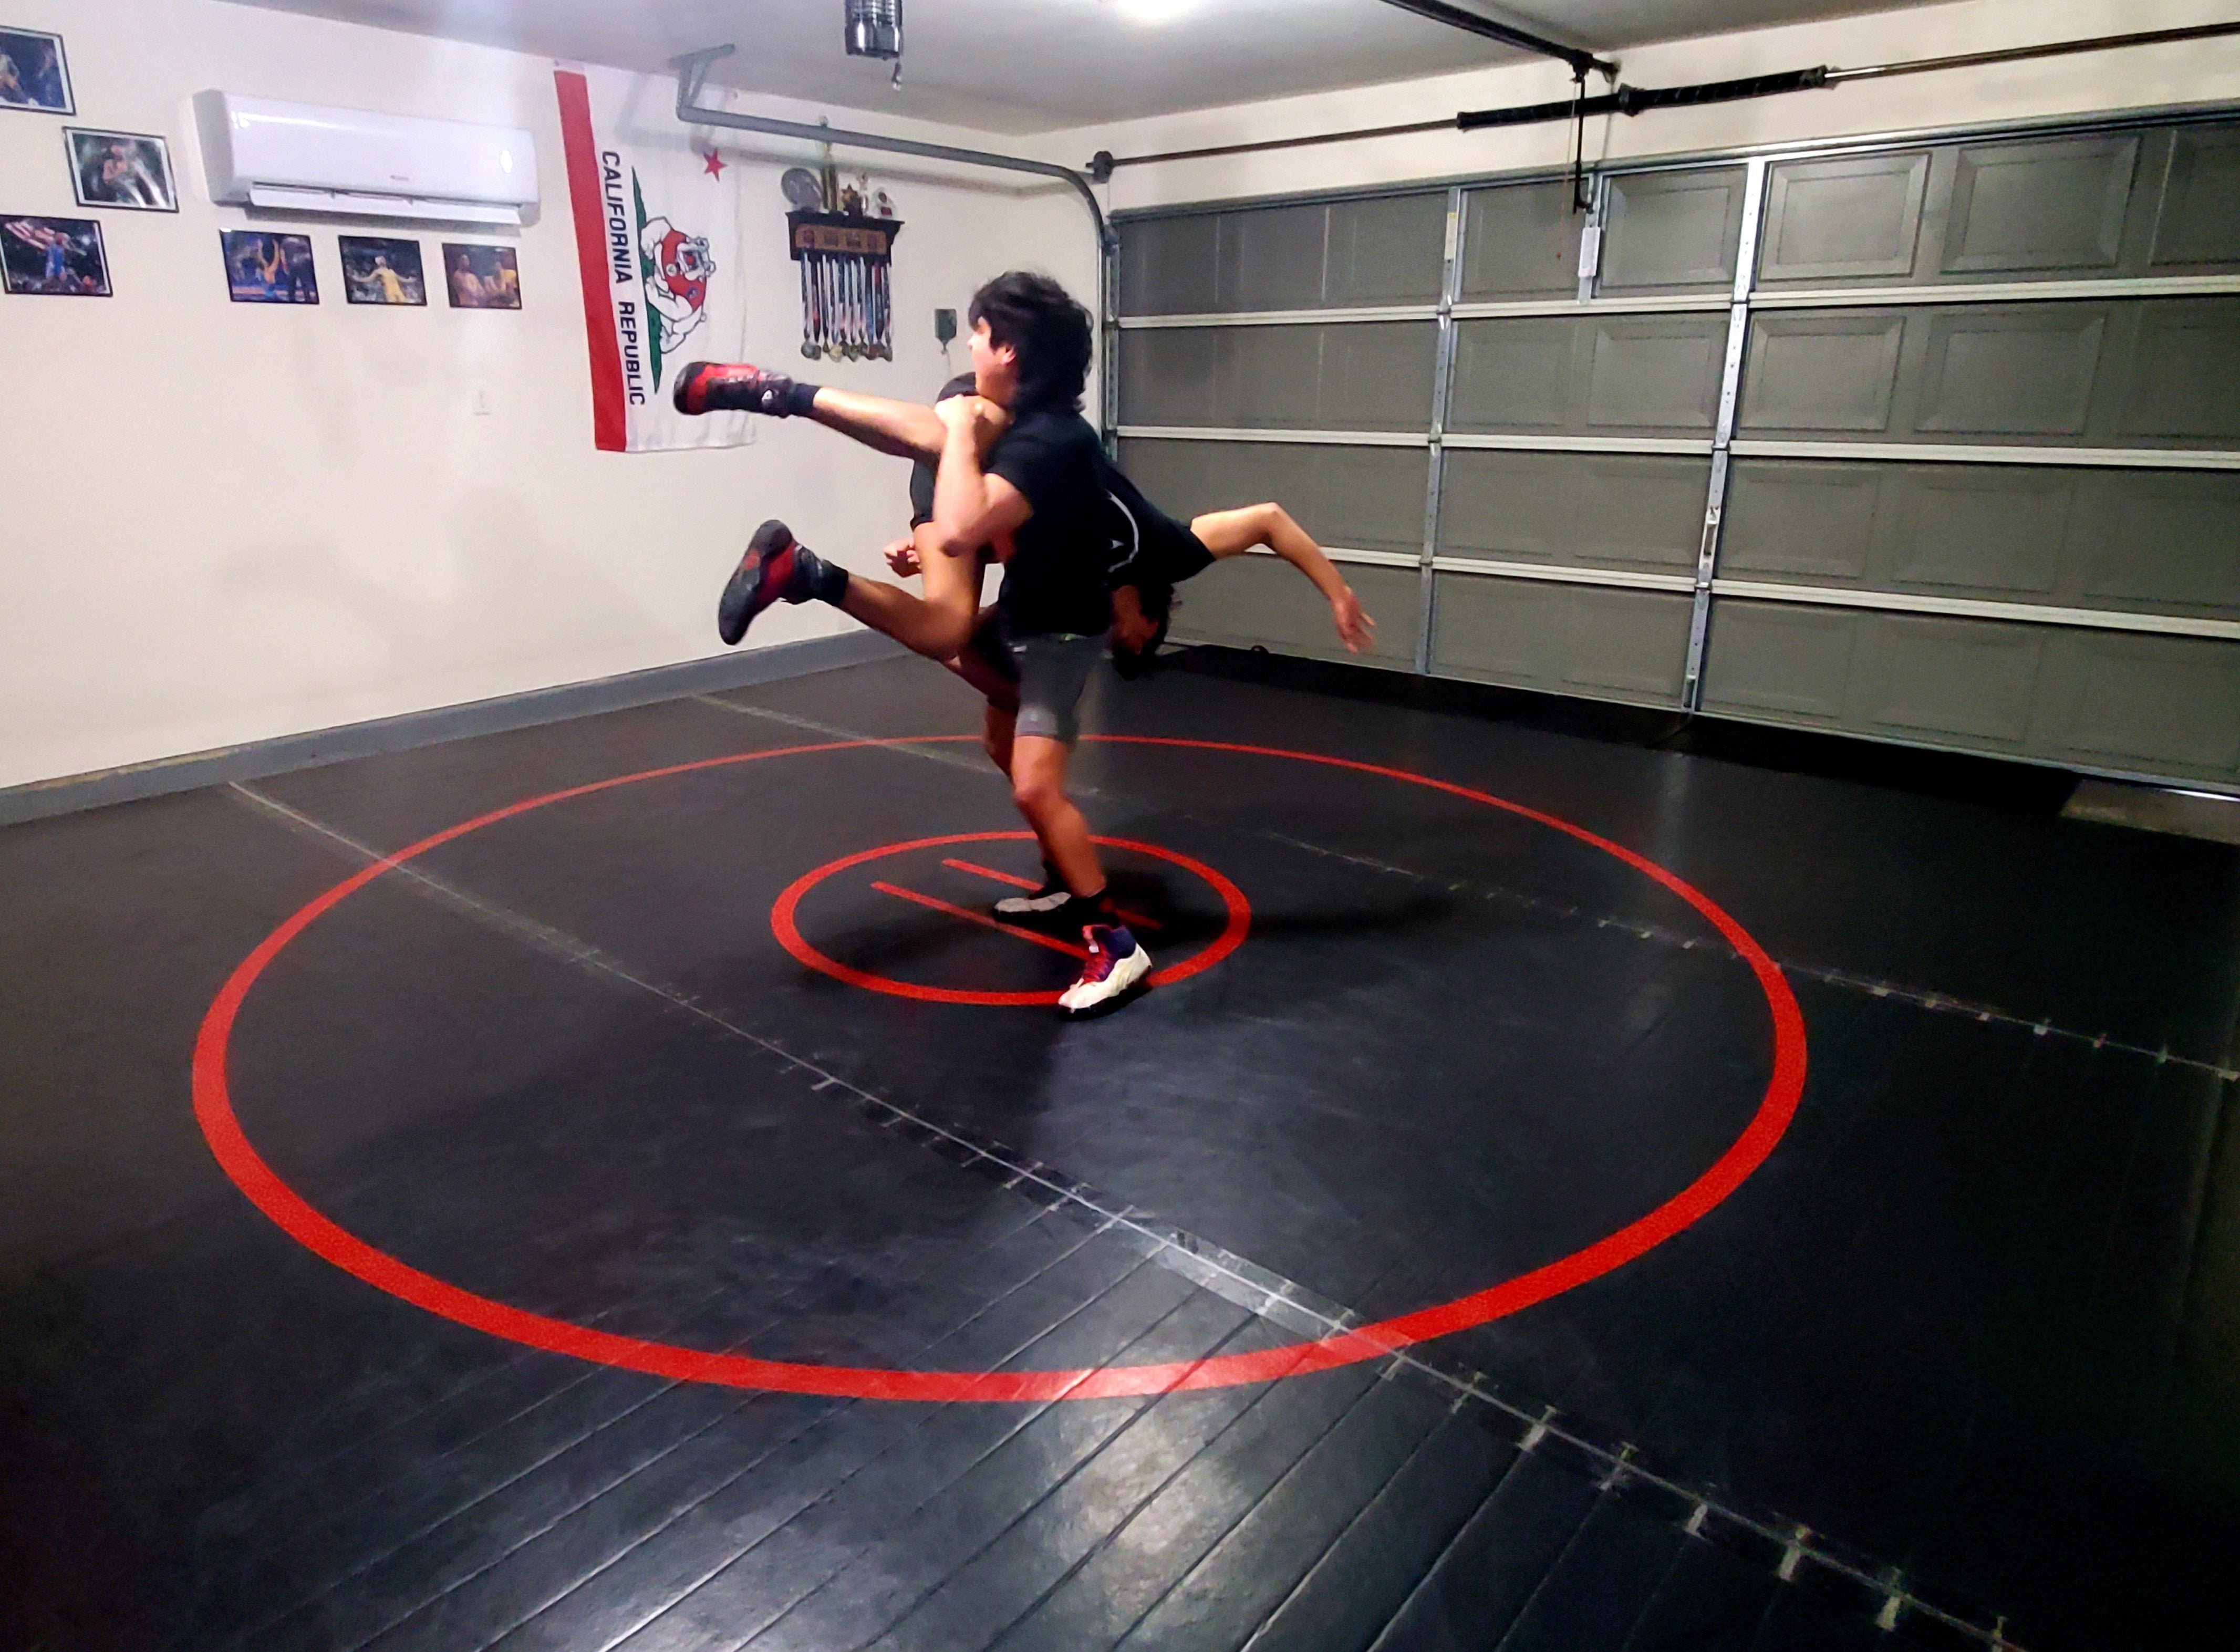 Black and Red Smooth, Easy to Clean Wrestling Mat in Home Garage Gym